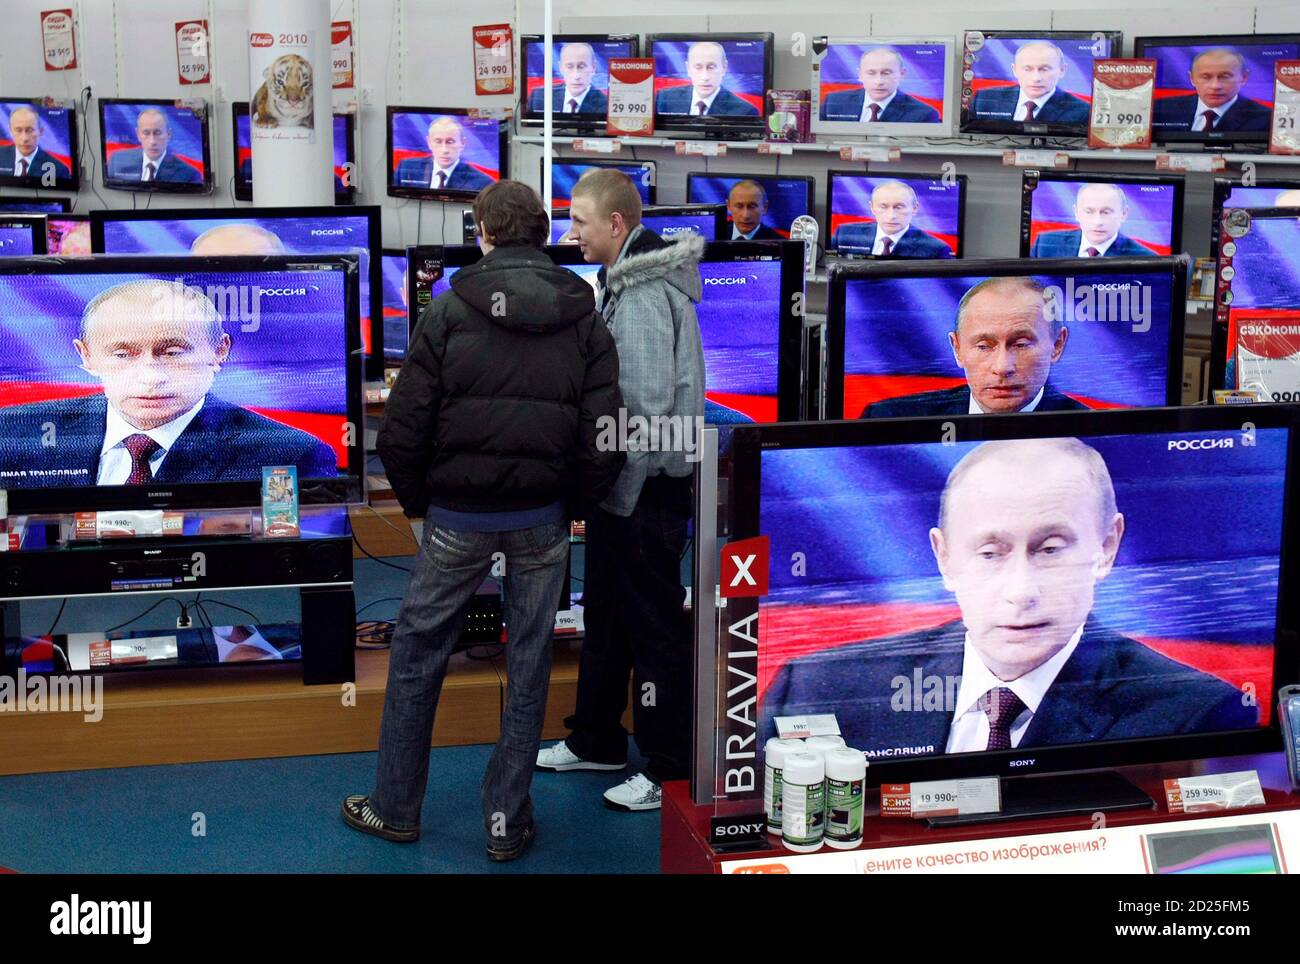 Men look at a television screening of Russia?s Prime Minister Vladimir  Putin as he speaks during a question-and-answer show at a Russian state TV  channel, at an electronics shop in Moscow December